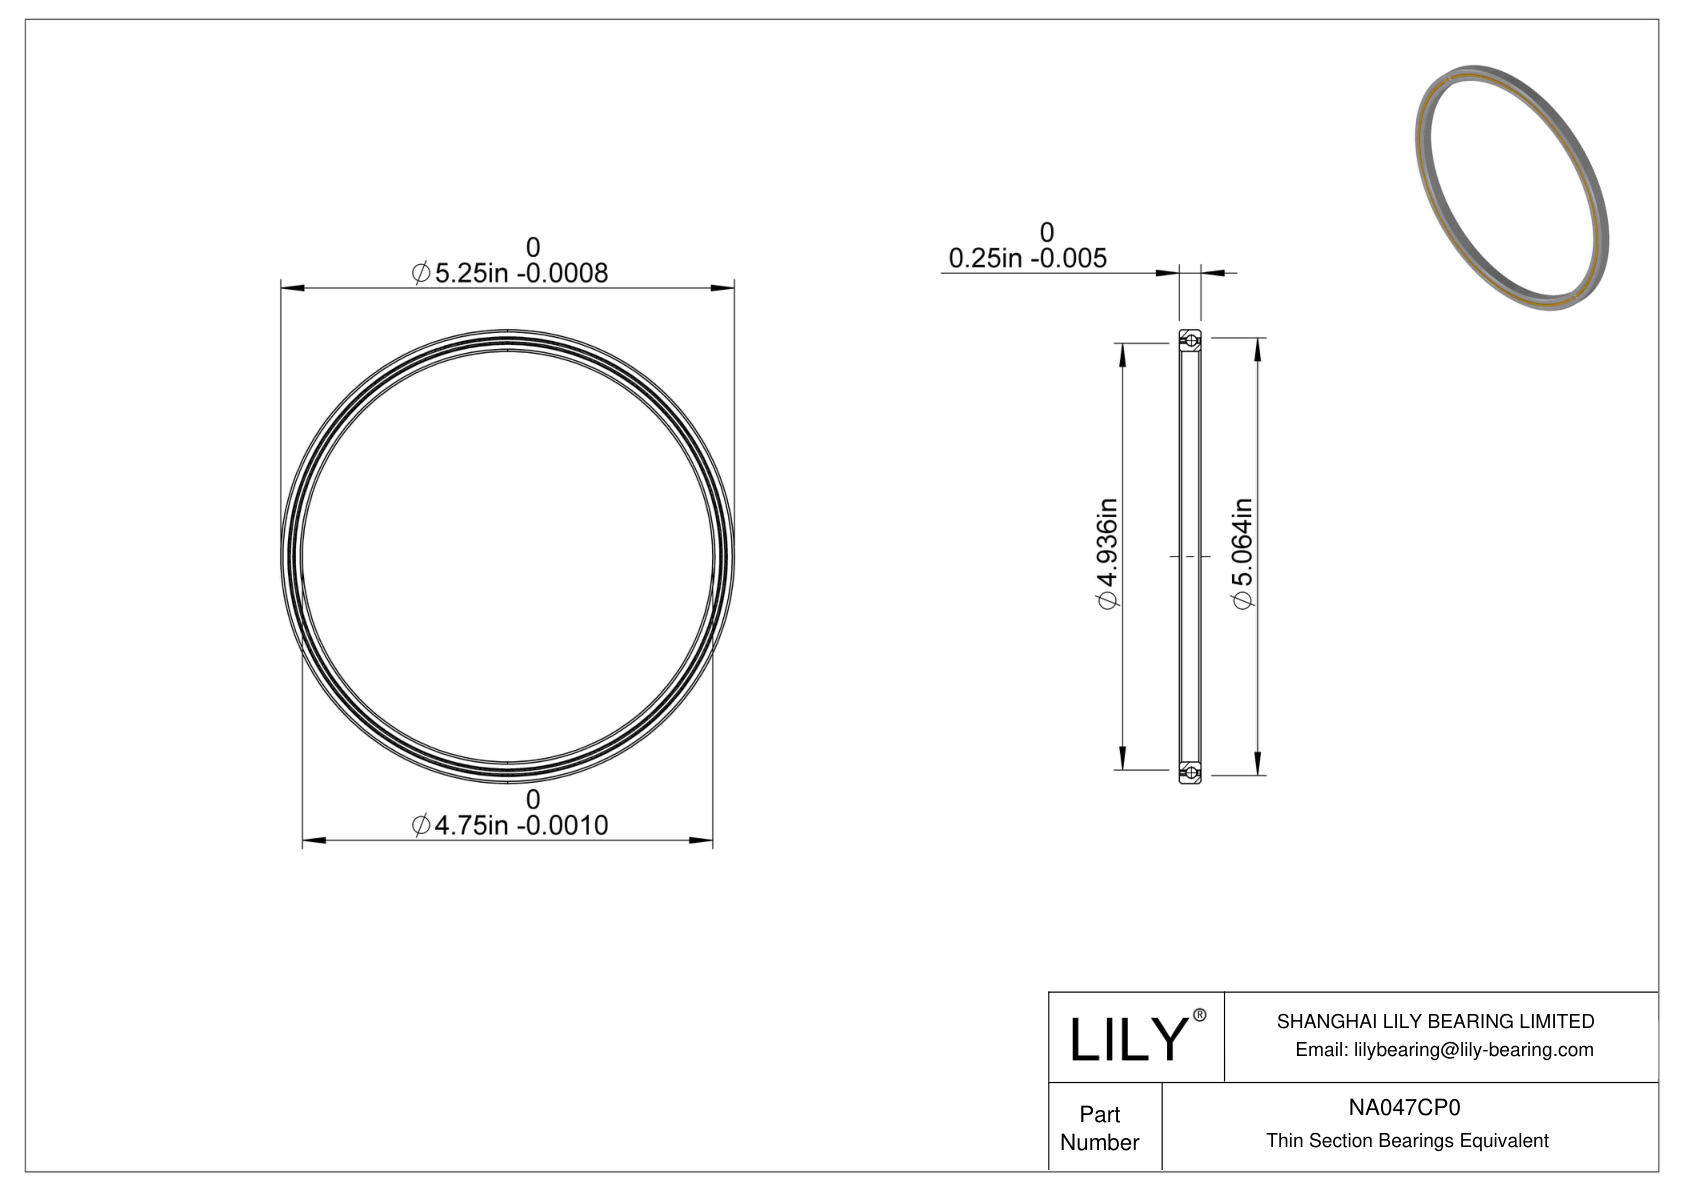 NA047CP0 Constant Section (CS) Bearings cad drawing